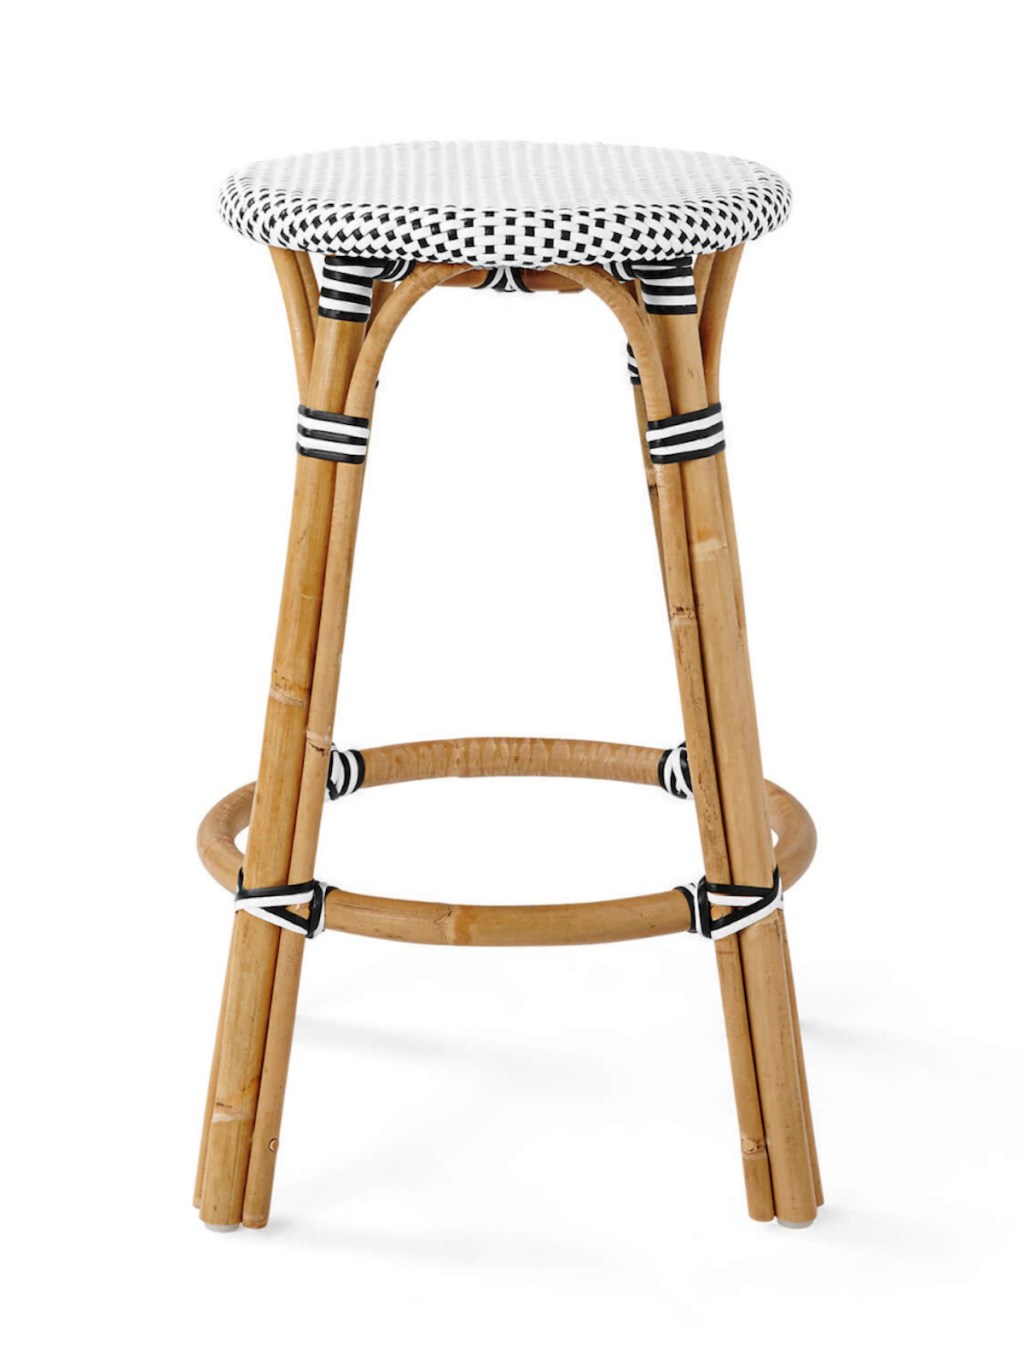 stock photo of Serena & Lily Riviera Counter Stool